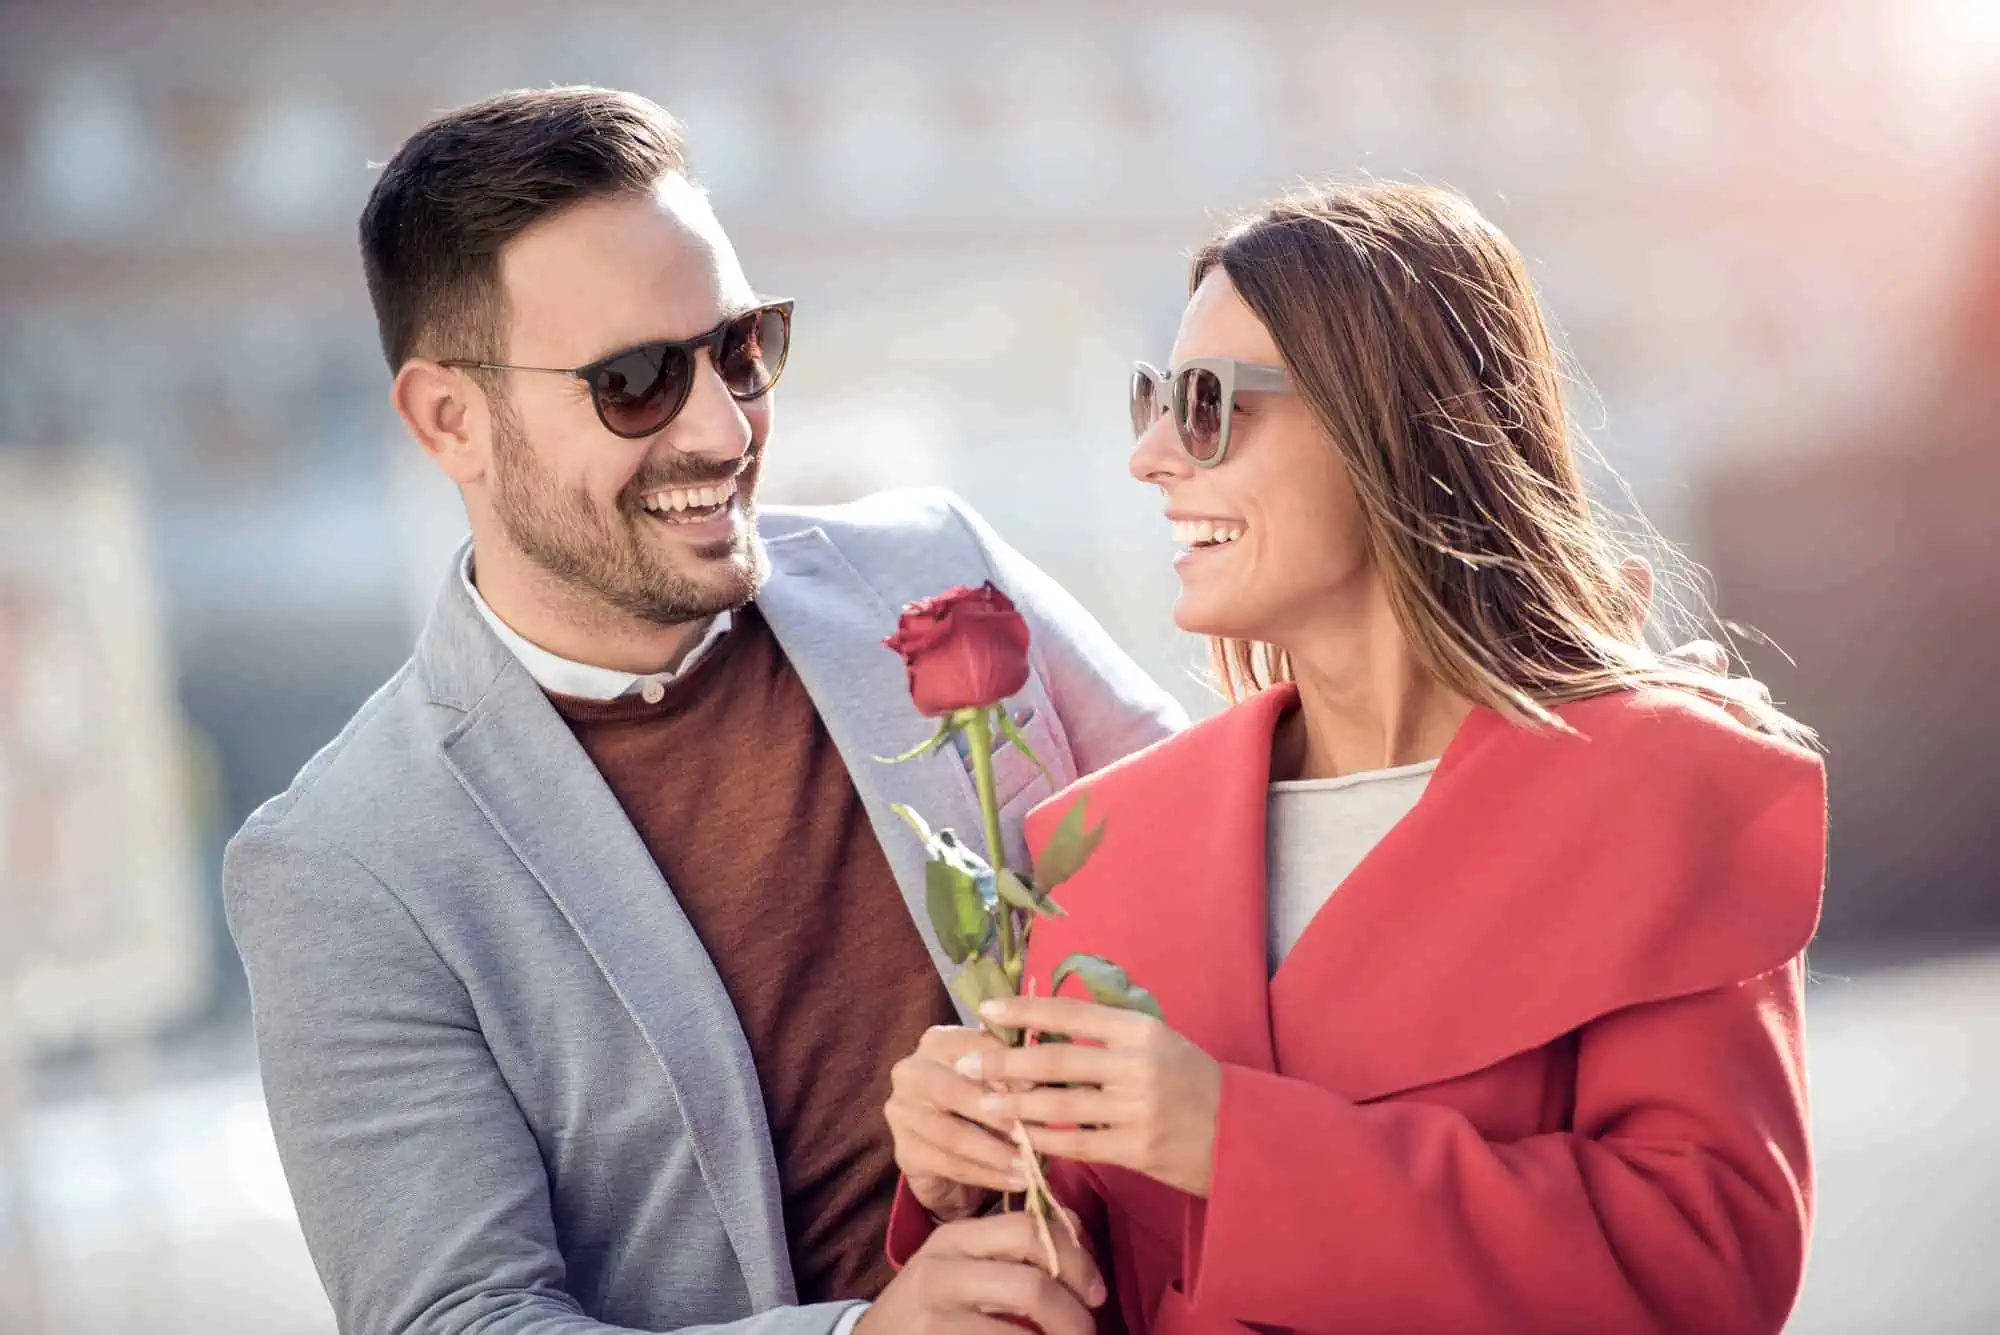 A man holding a rose and smiling at a woman